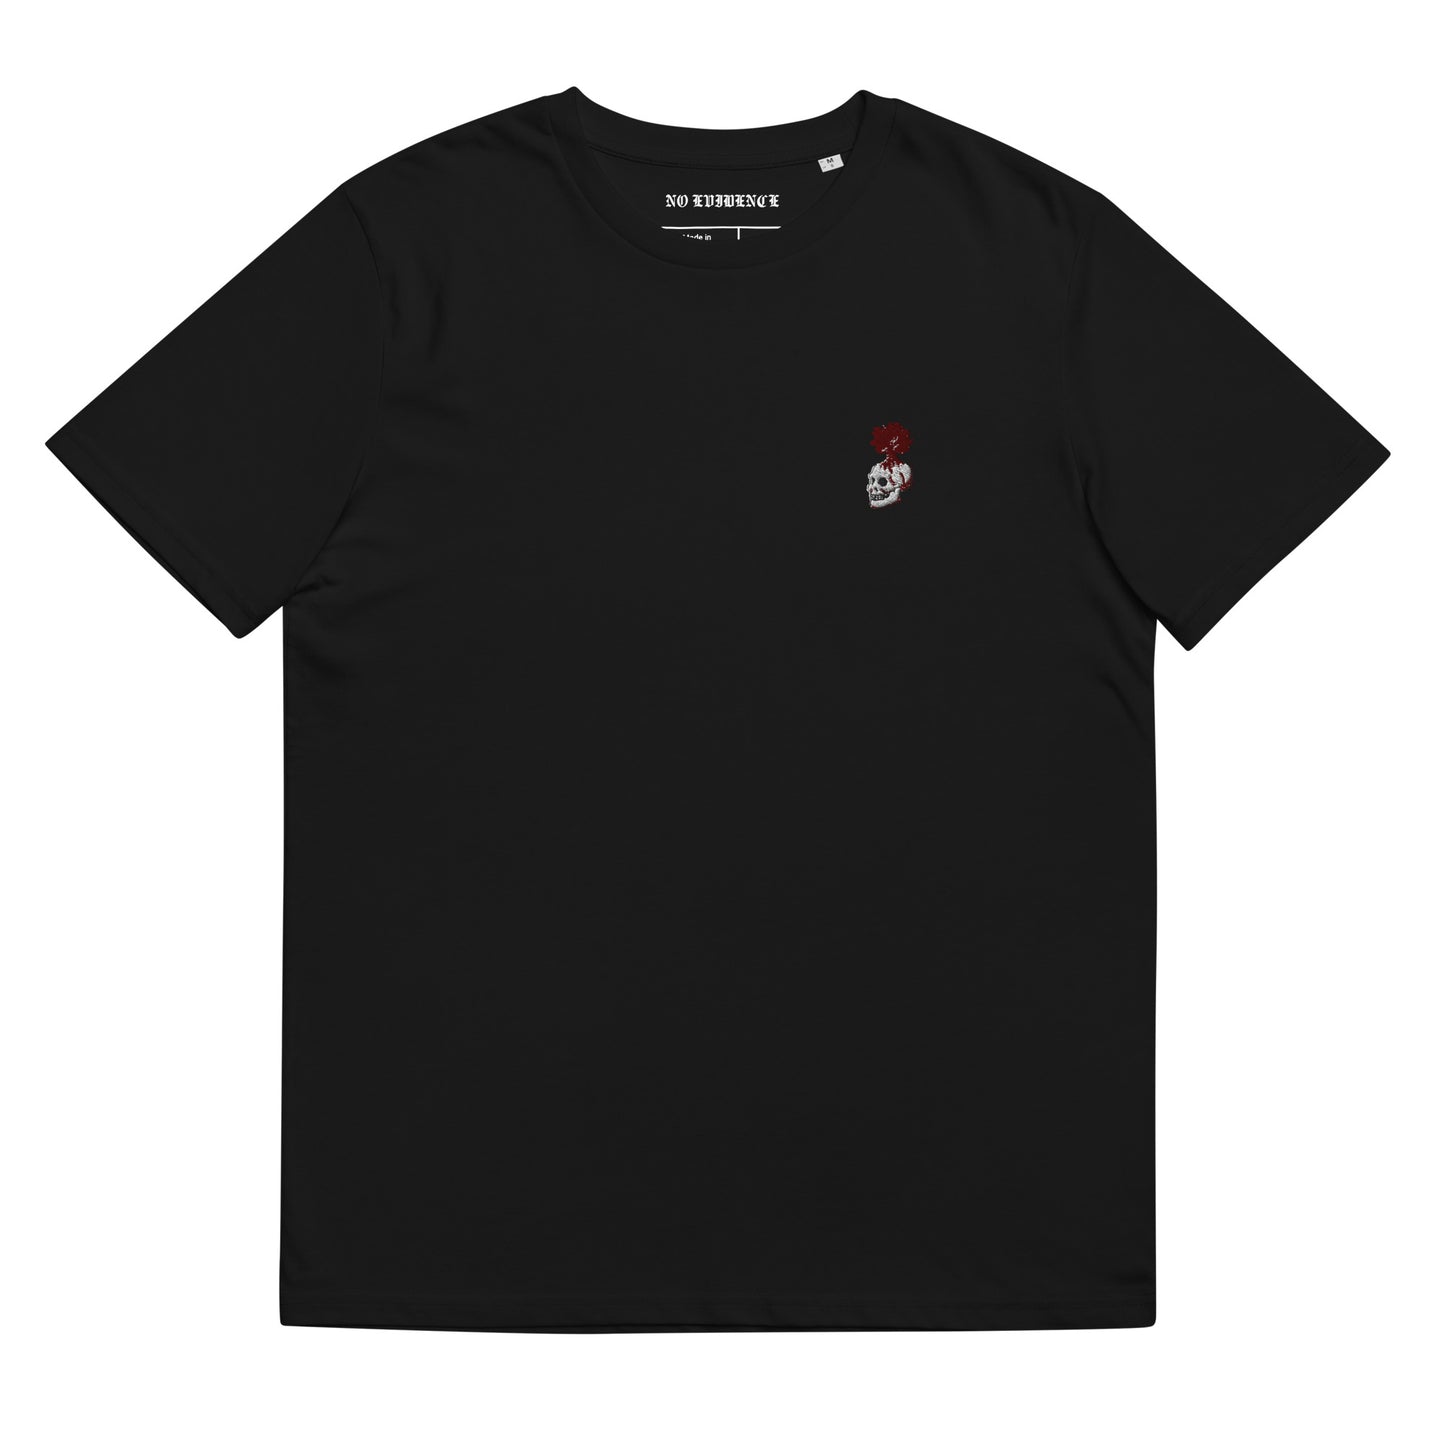 NE classic t-shirt embroidered